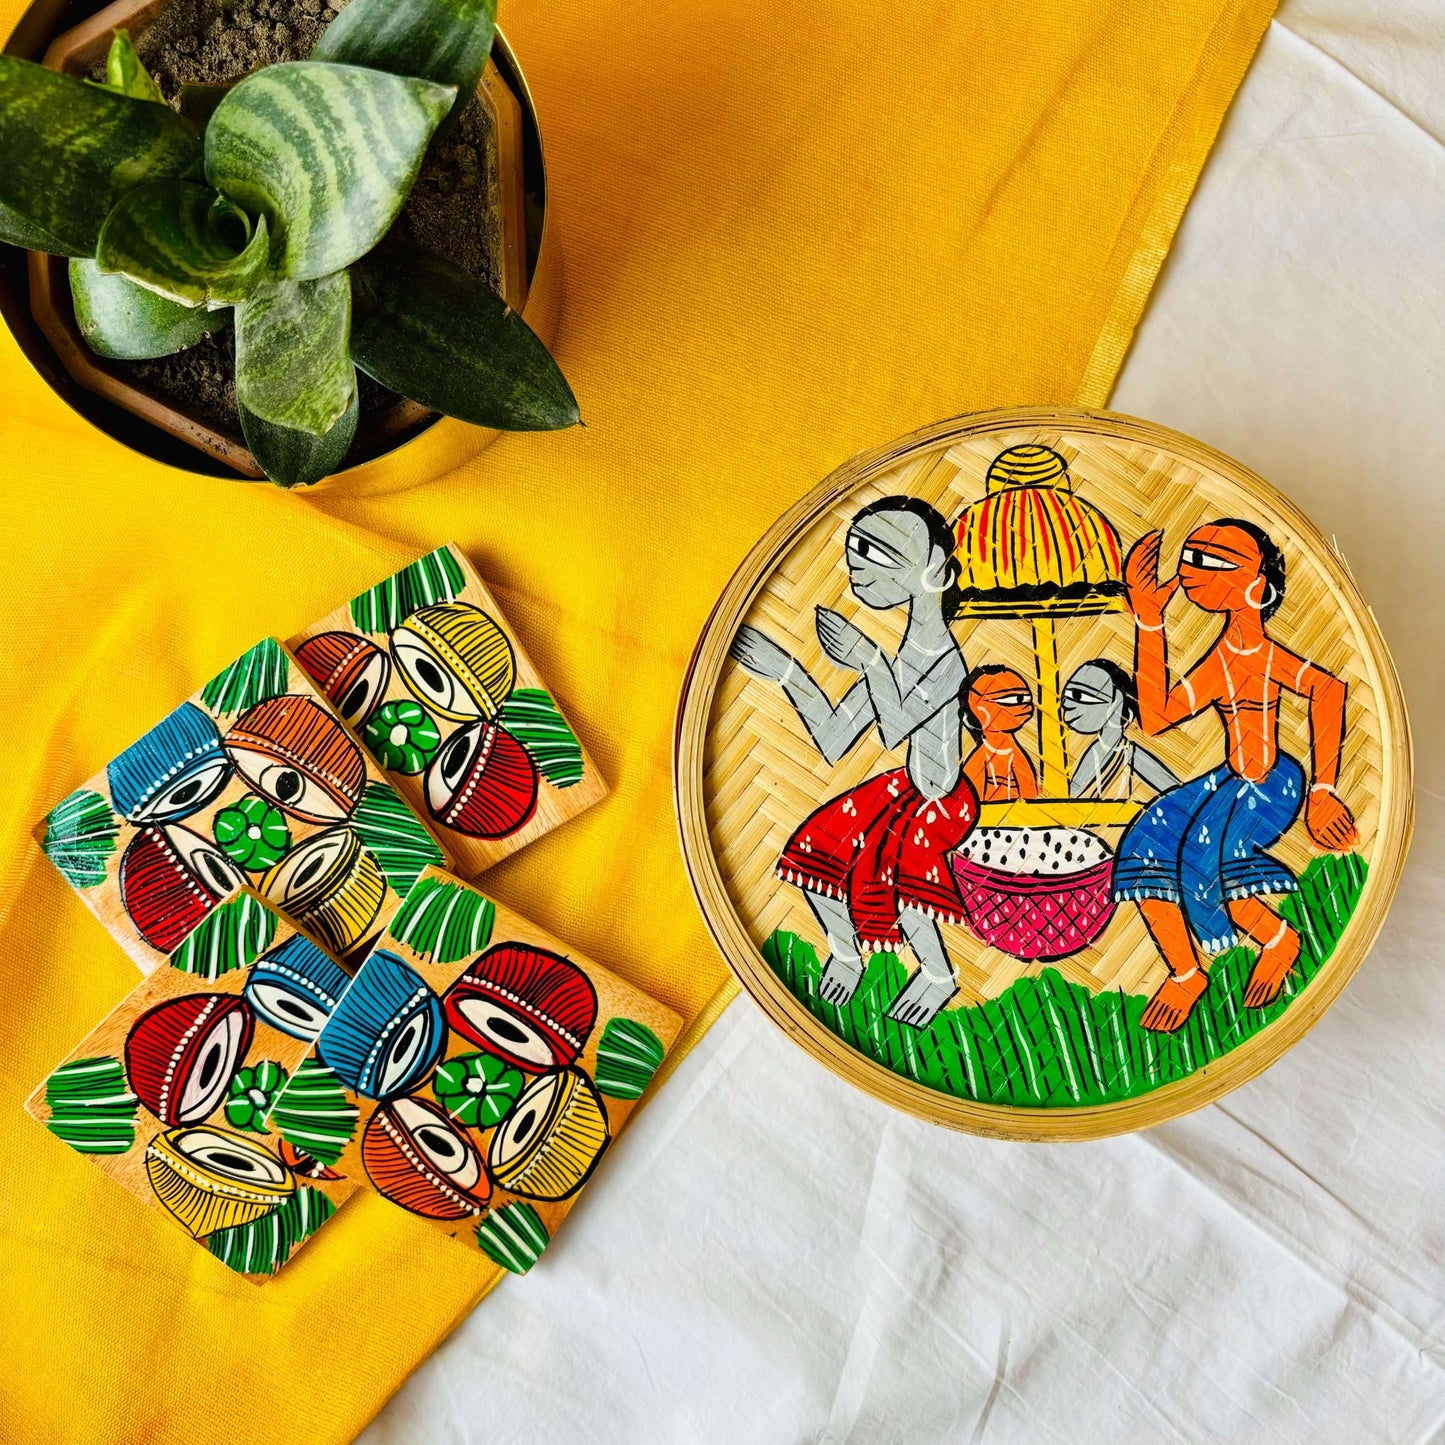 One hand-woven bamboo fruit box hand-painted with a motif of tribal characters indulged in a wedding celebration, and a set of four square wood coasters hand-painted with a motif of musical instruments are displayed against a yellow background with a plant pot beside them